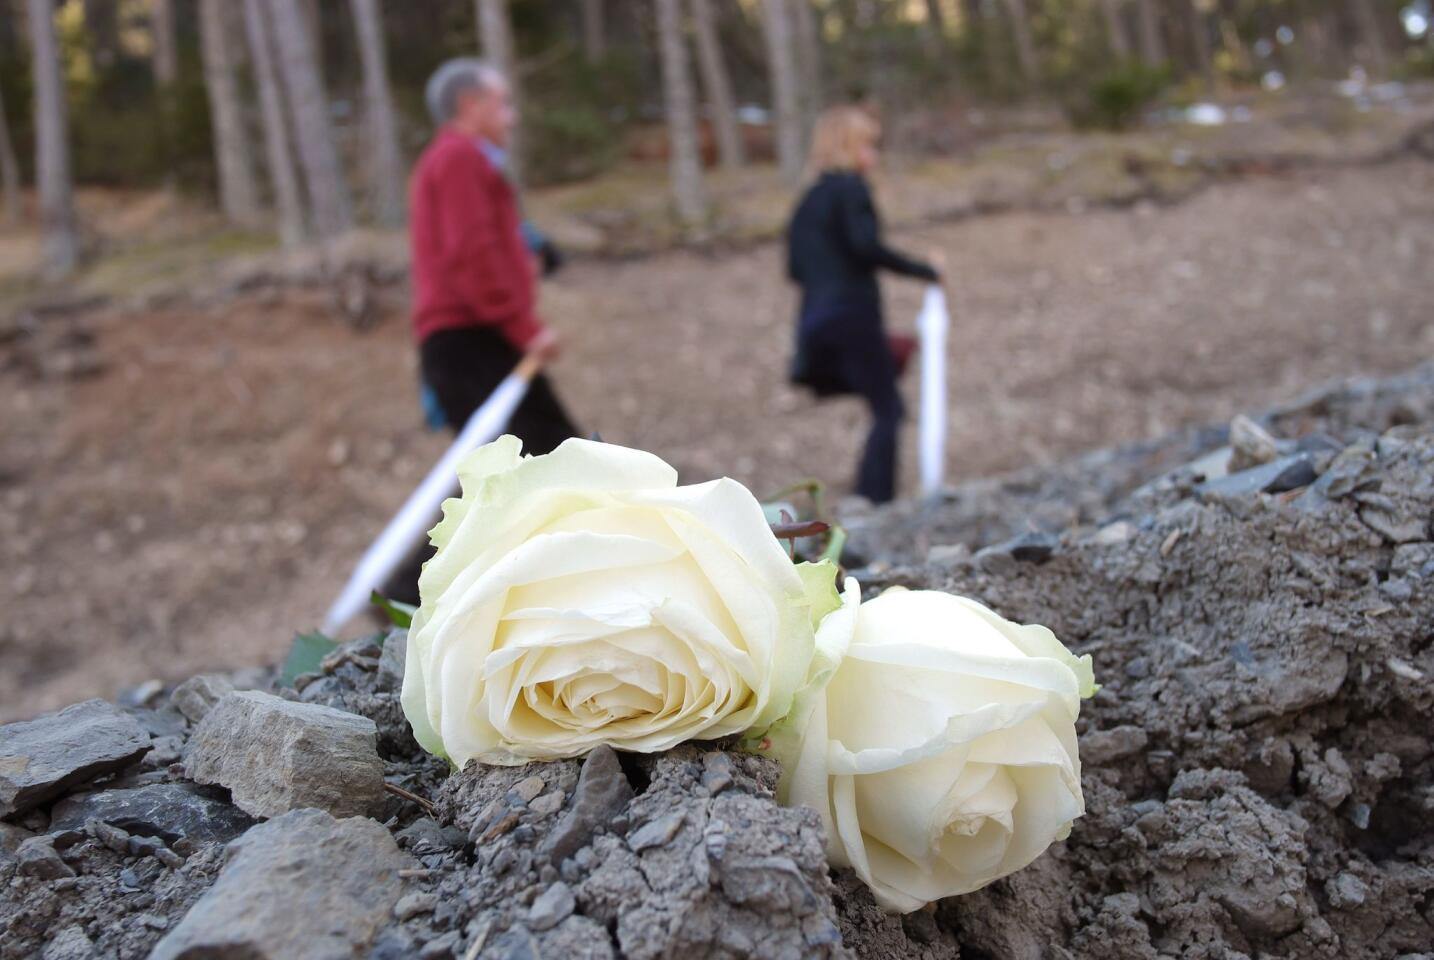 Relatives and friends of victims walk on the Col in Le Vernet, southwestern France, on March 24, 2016, in front of the mountain (background) were the plane of Germanwings crashed a year ago, to mark the first anniversary of the Germanwings tragedy in which a suicidal pilot crashed a plane into a mountainside, killing all 150 on board.